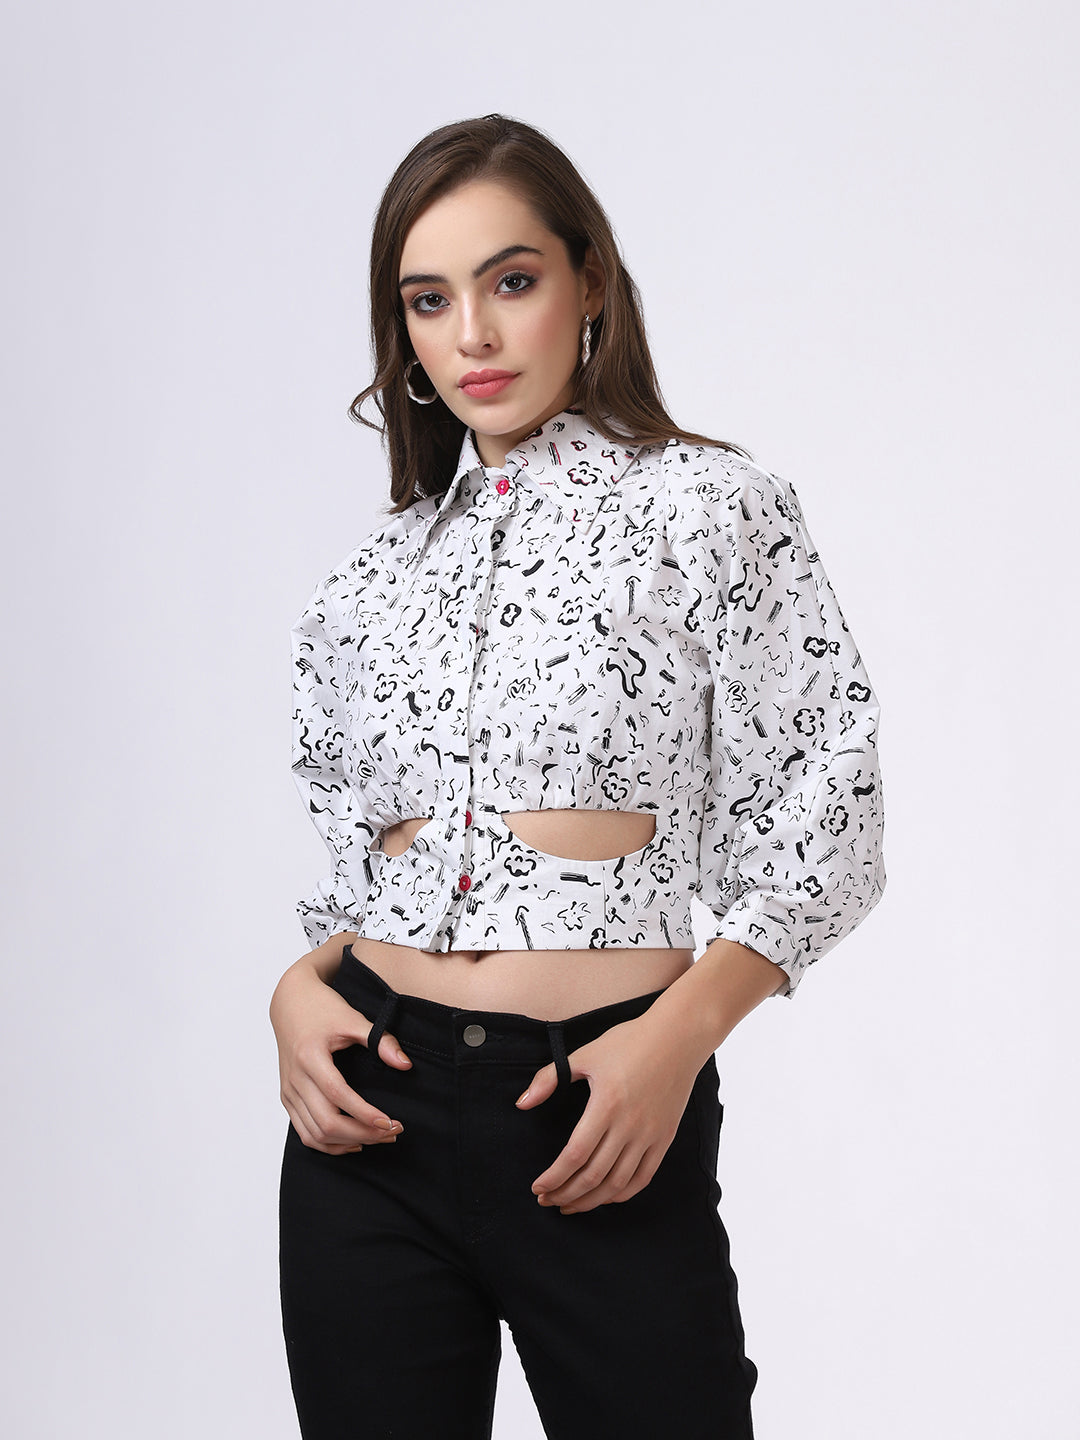 Abstract Cut-Out Top